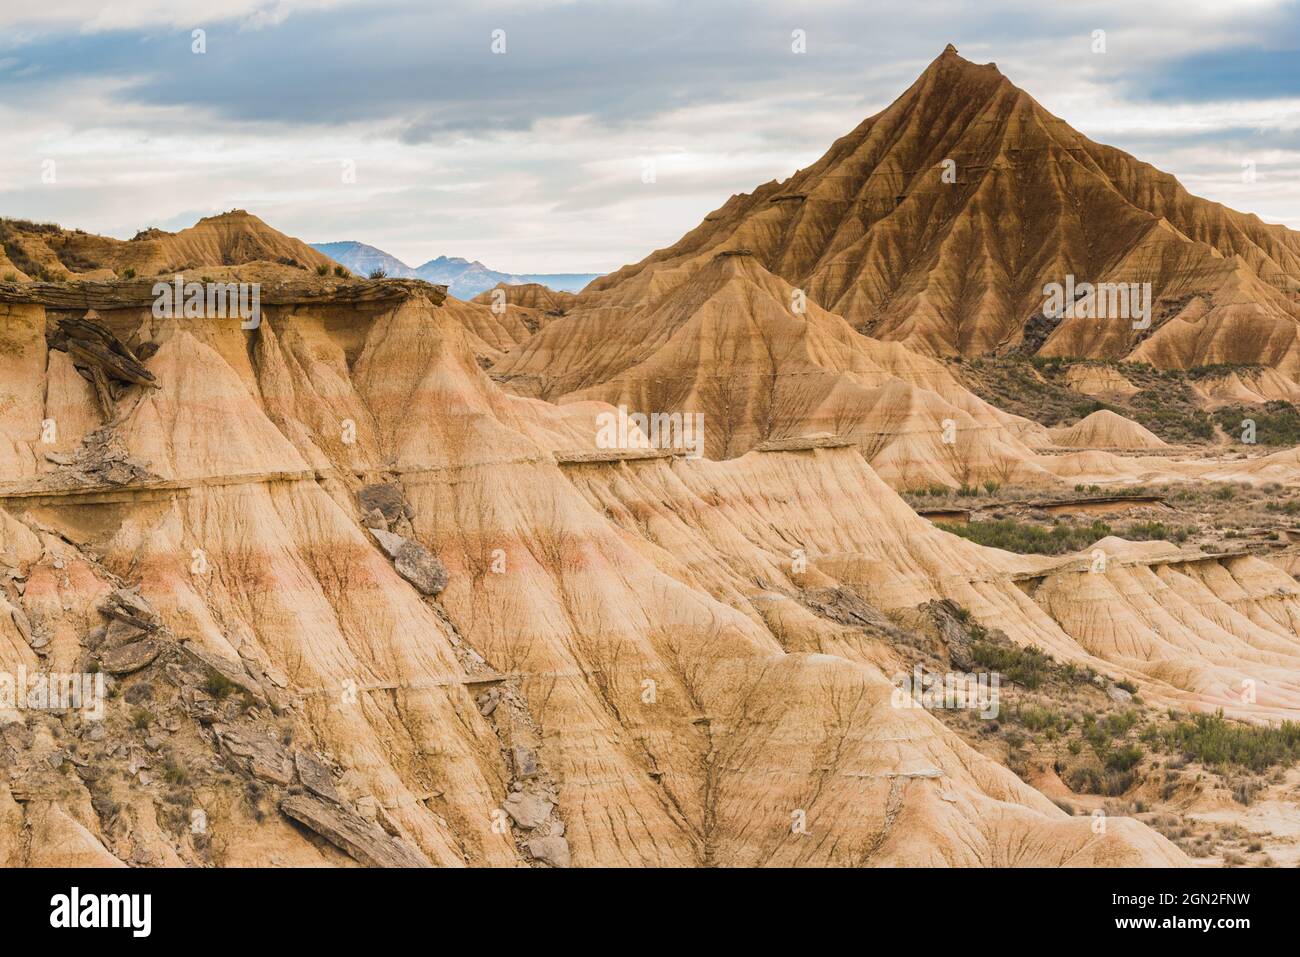 SPAIN, SPANISH BASQUE COUNTRY. NAVARRE, BARDENAS DESERT, VIEW OF A CLAY CLIFF WITH A ROCKFALL Stock Photo